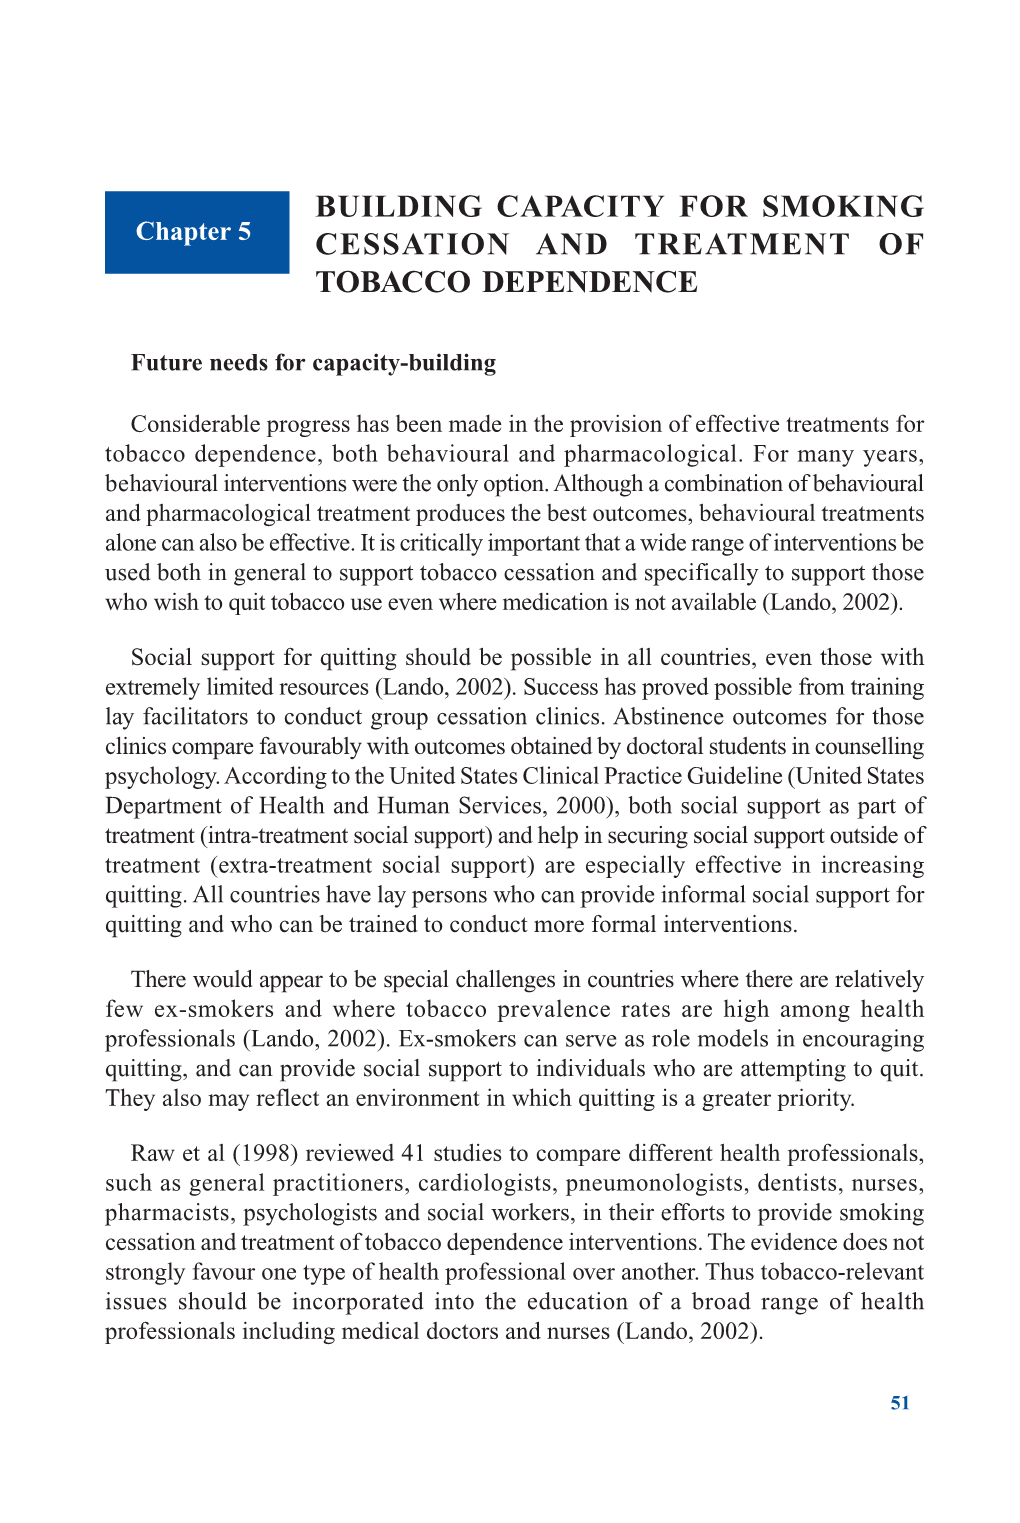 Building Capacity for Smoking Cessation and Treatment of Tobacco